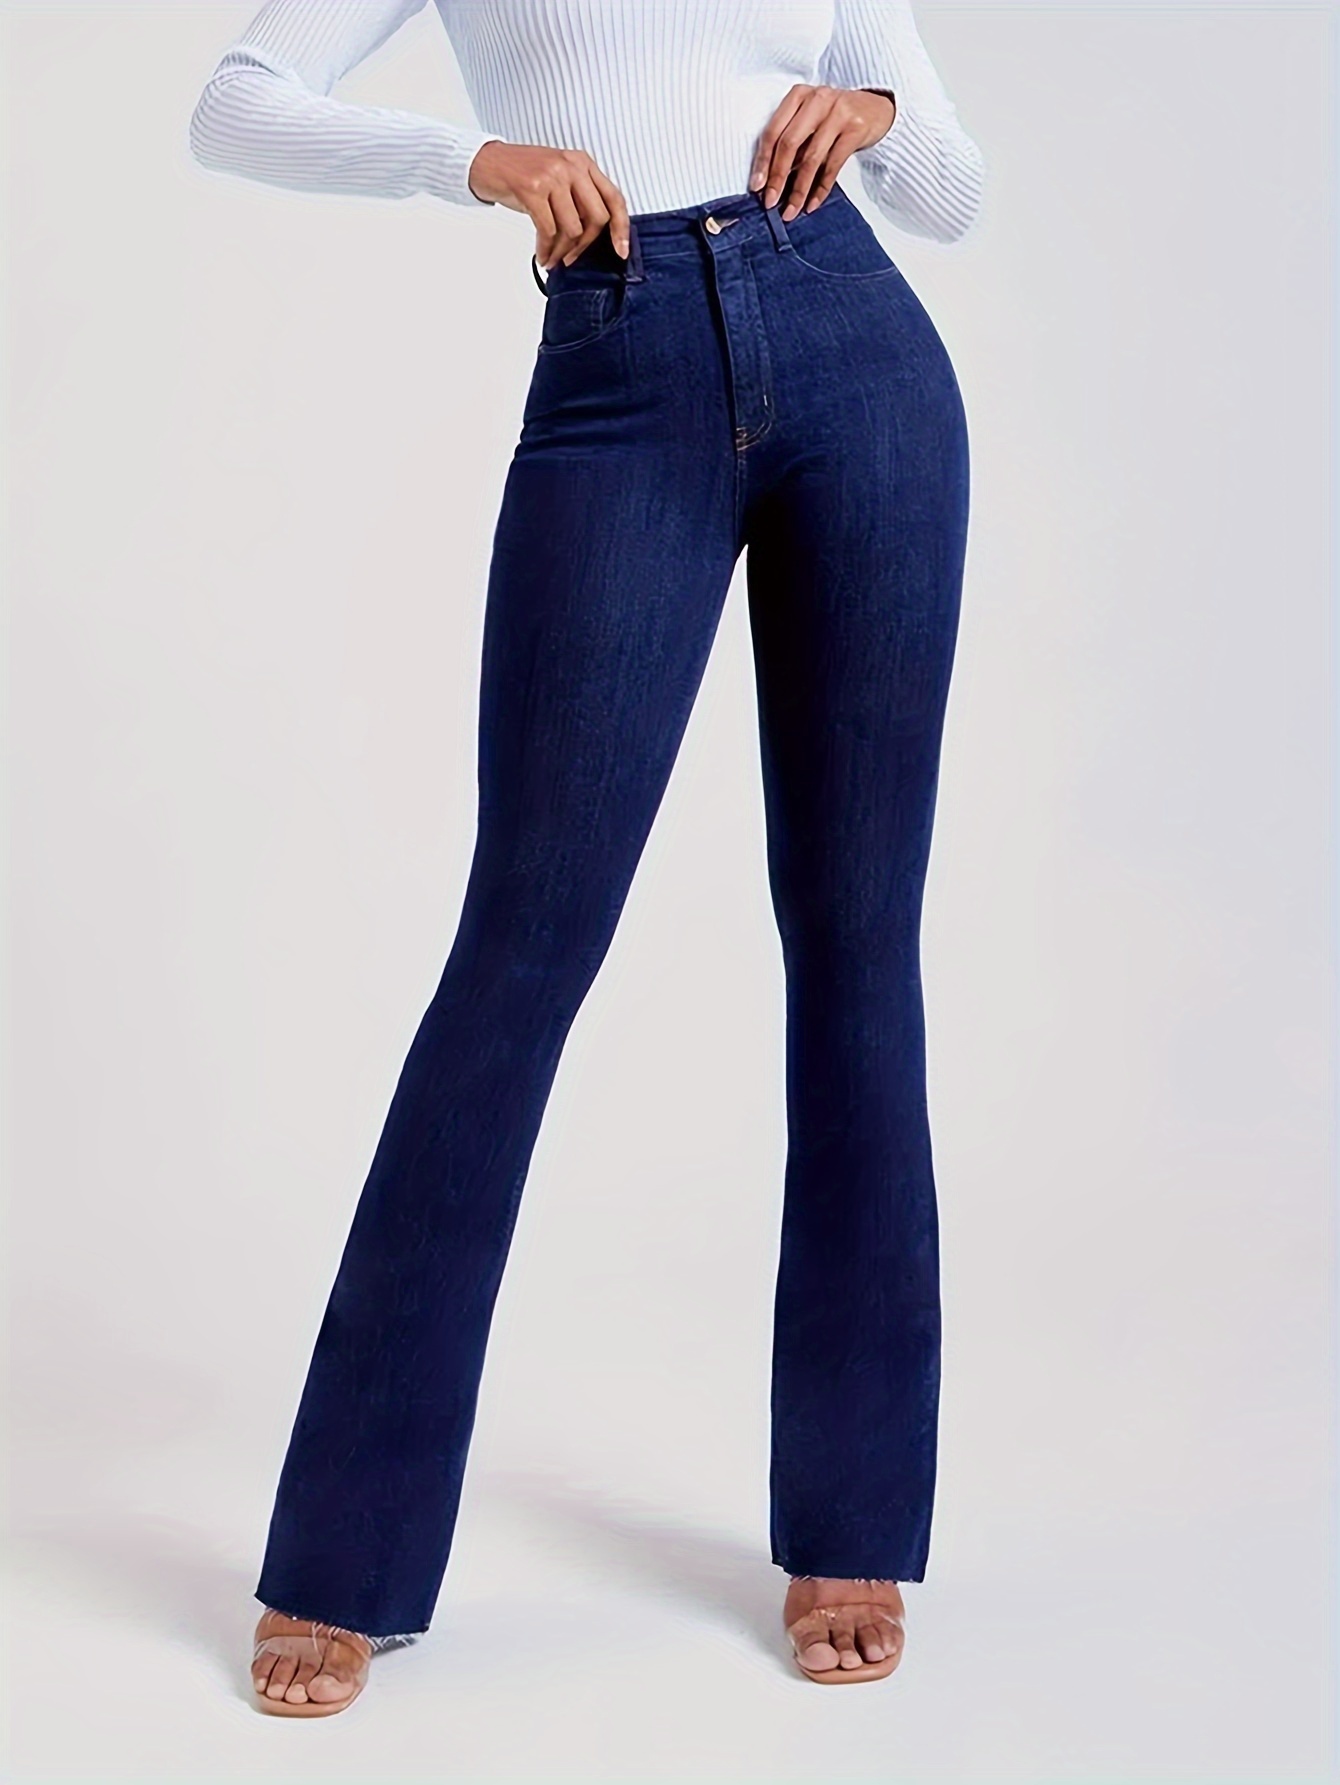 Bell Bottom Jeans for Women High Waisted Flare Jeans Vintage